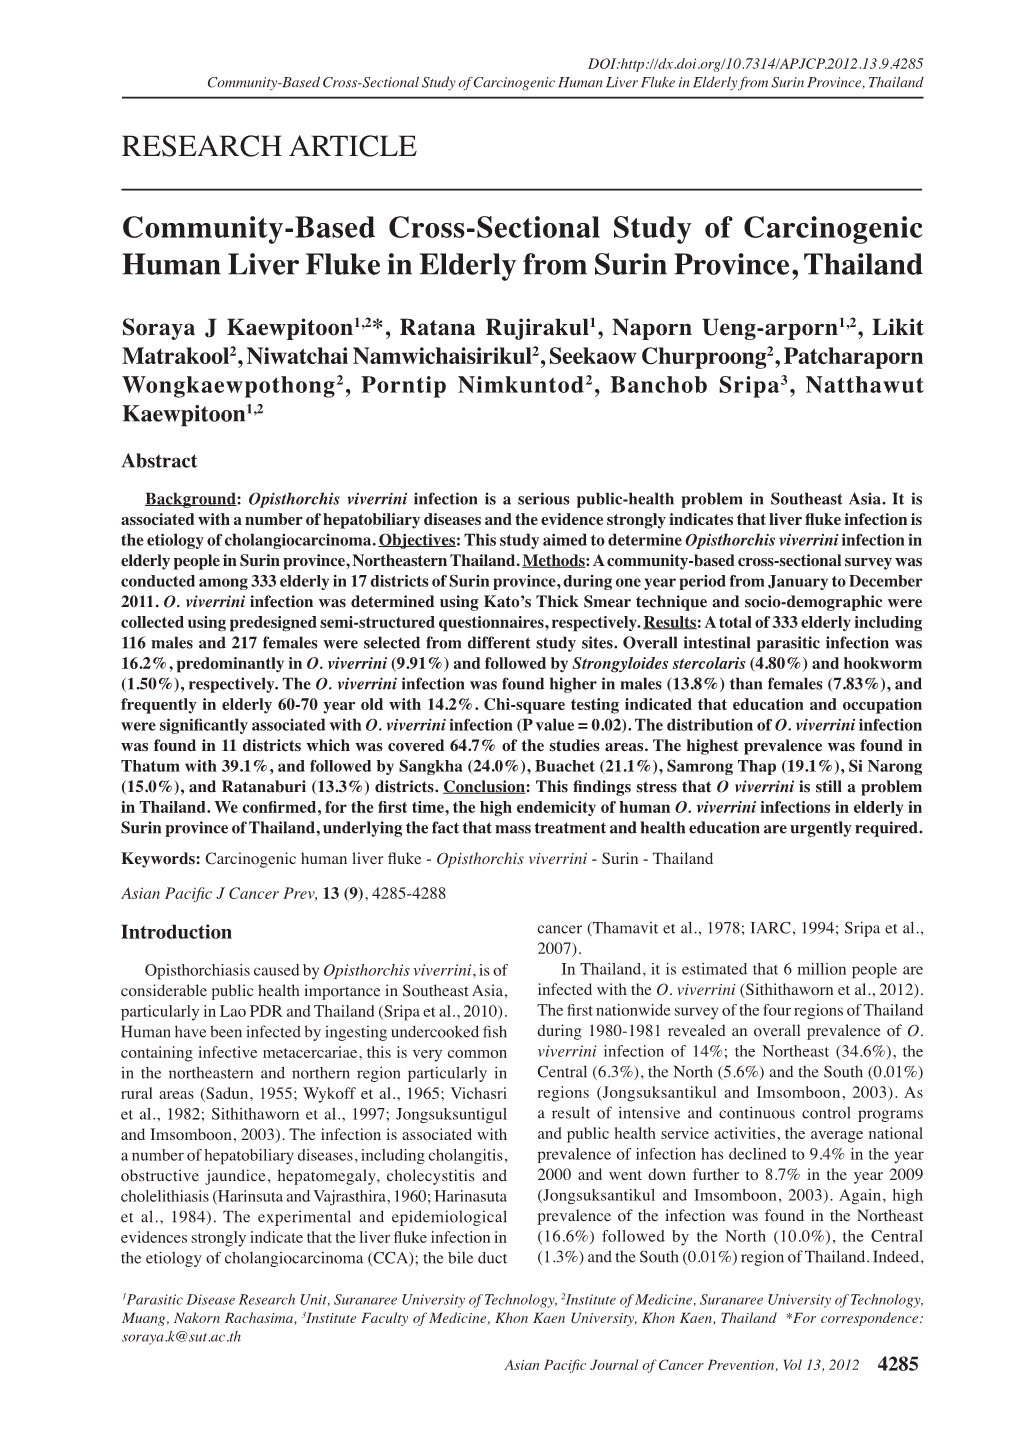 Community-Based Cross-Sectional Study of Carcinogenic Human Liver Fluke in Elderly from Surin Province, Thailand